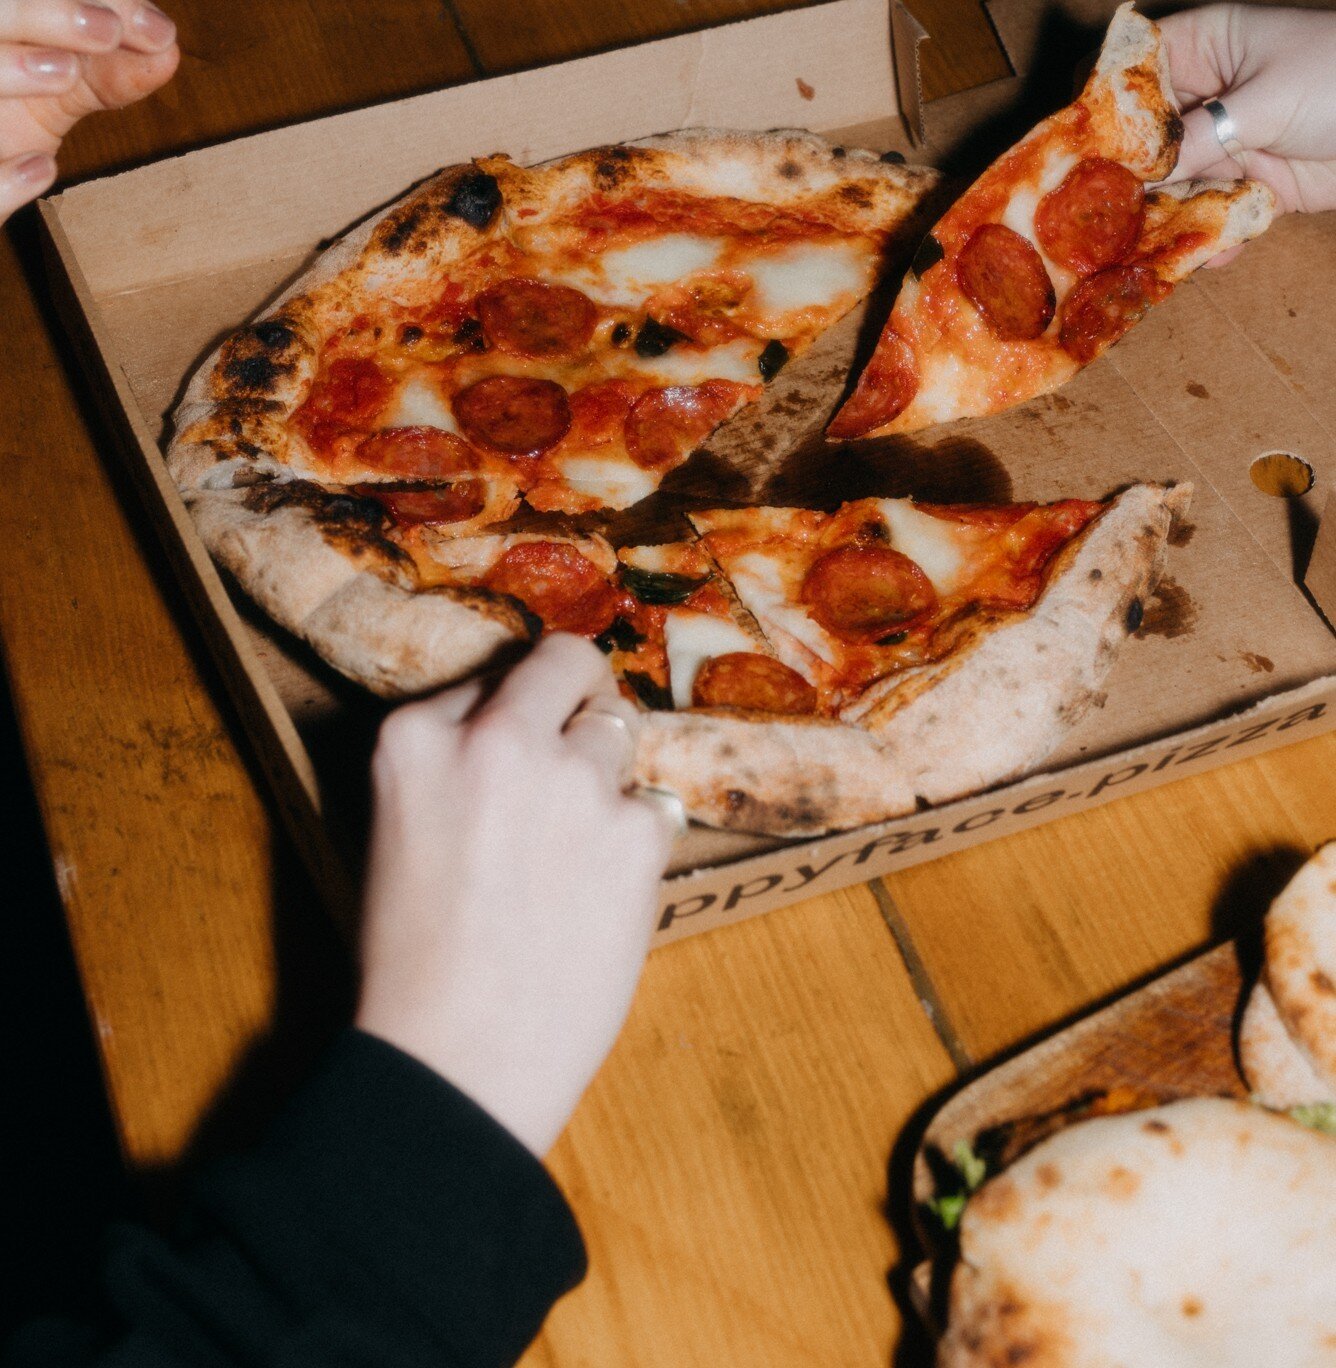 Hey North London, the pizza stars have aligned at Happy Face Pizza! 🌟🍕 ⁠
⁠
'Isabella', our adorable pizza wagon, is now serving up at @archives_ldn Tottenham. Think blisteringly good Neapolitan pizzas with a side of our signature grins.⁠
⁠
Zip on o